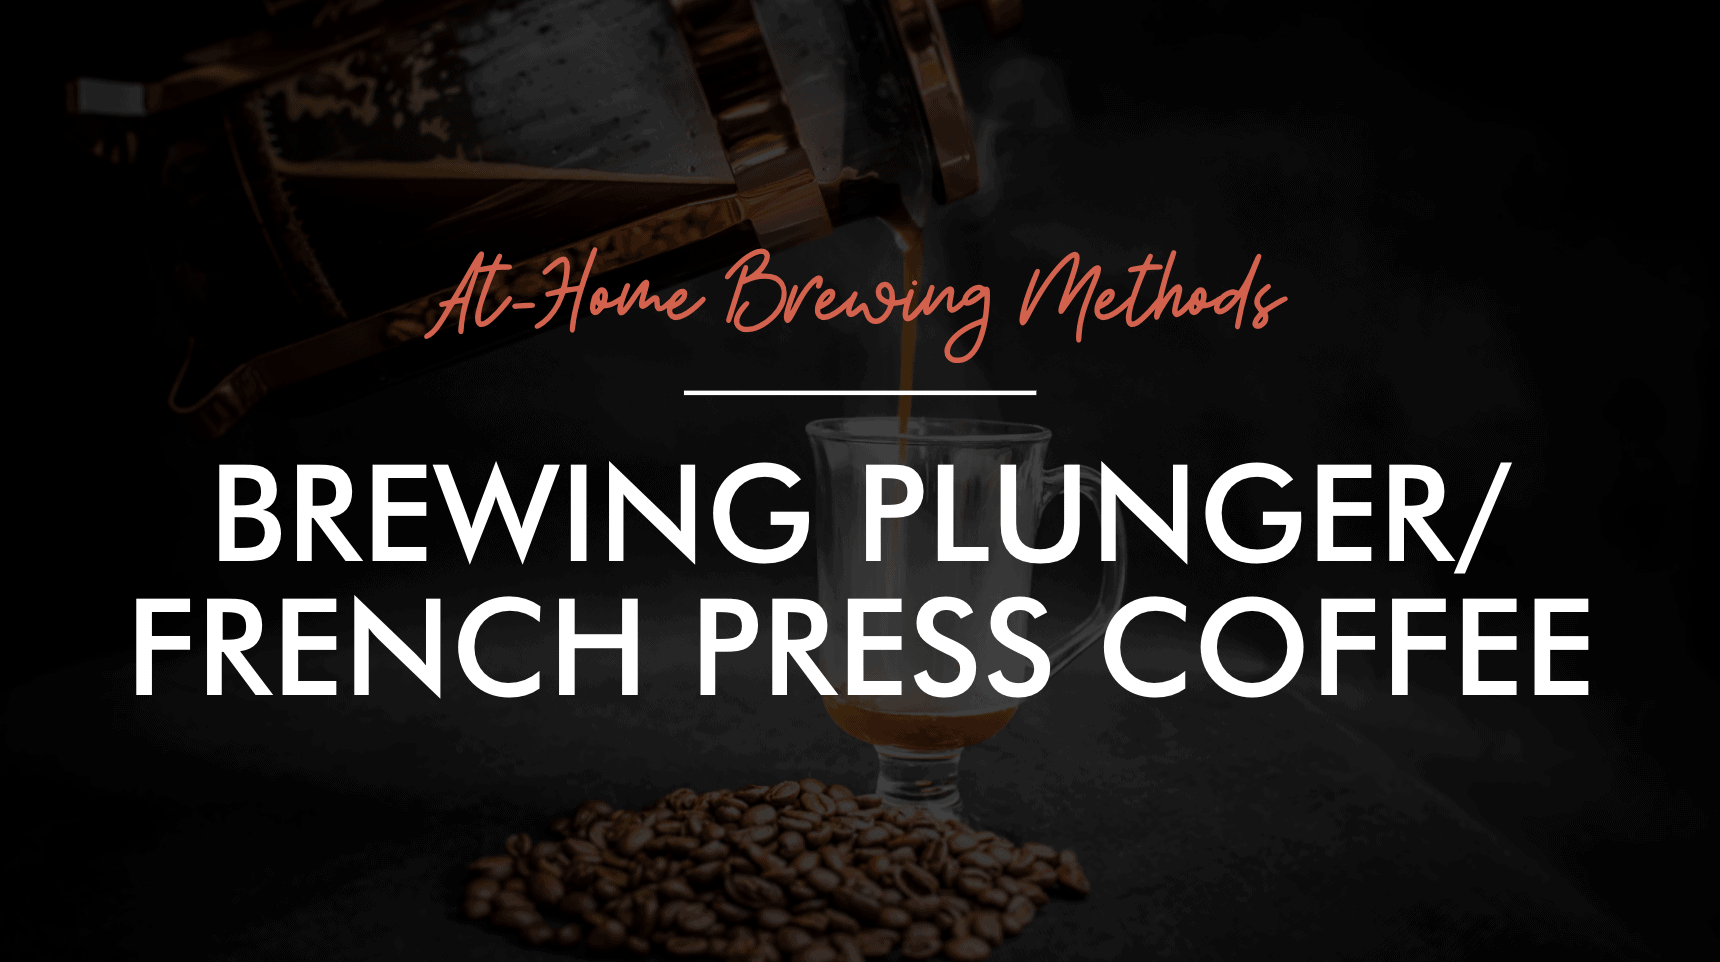 Home Brewing Methods: Plunger/French Press